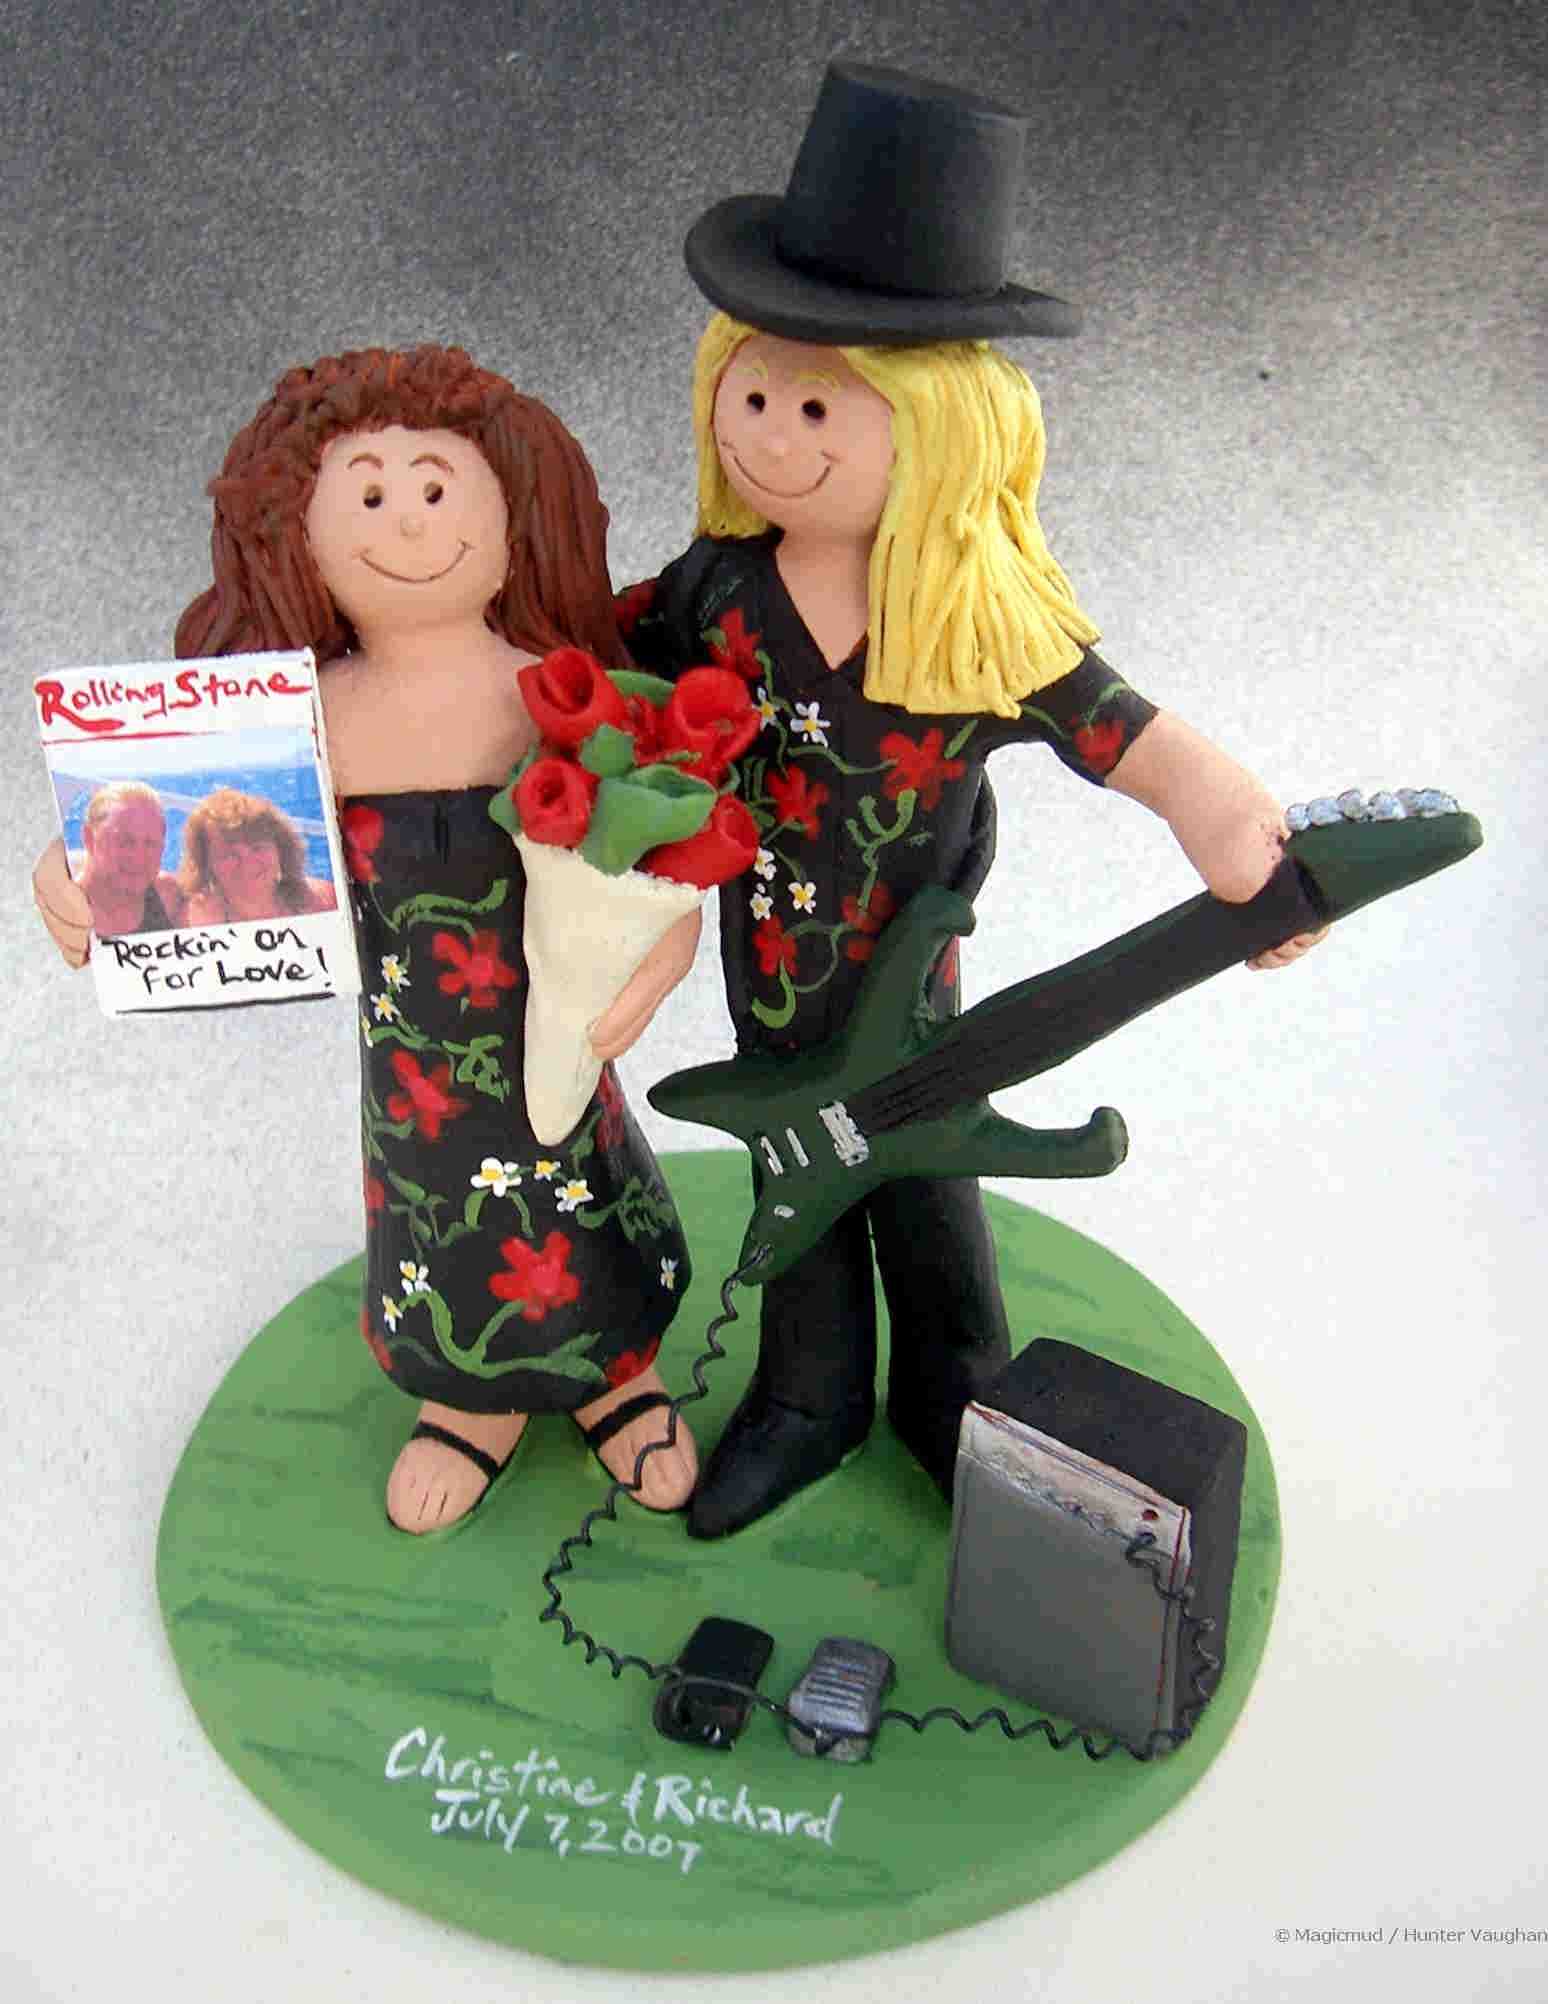 Wedding Cake Topper for a Rock Star